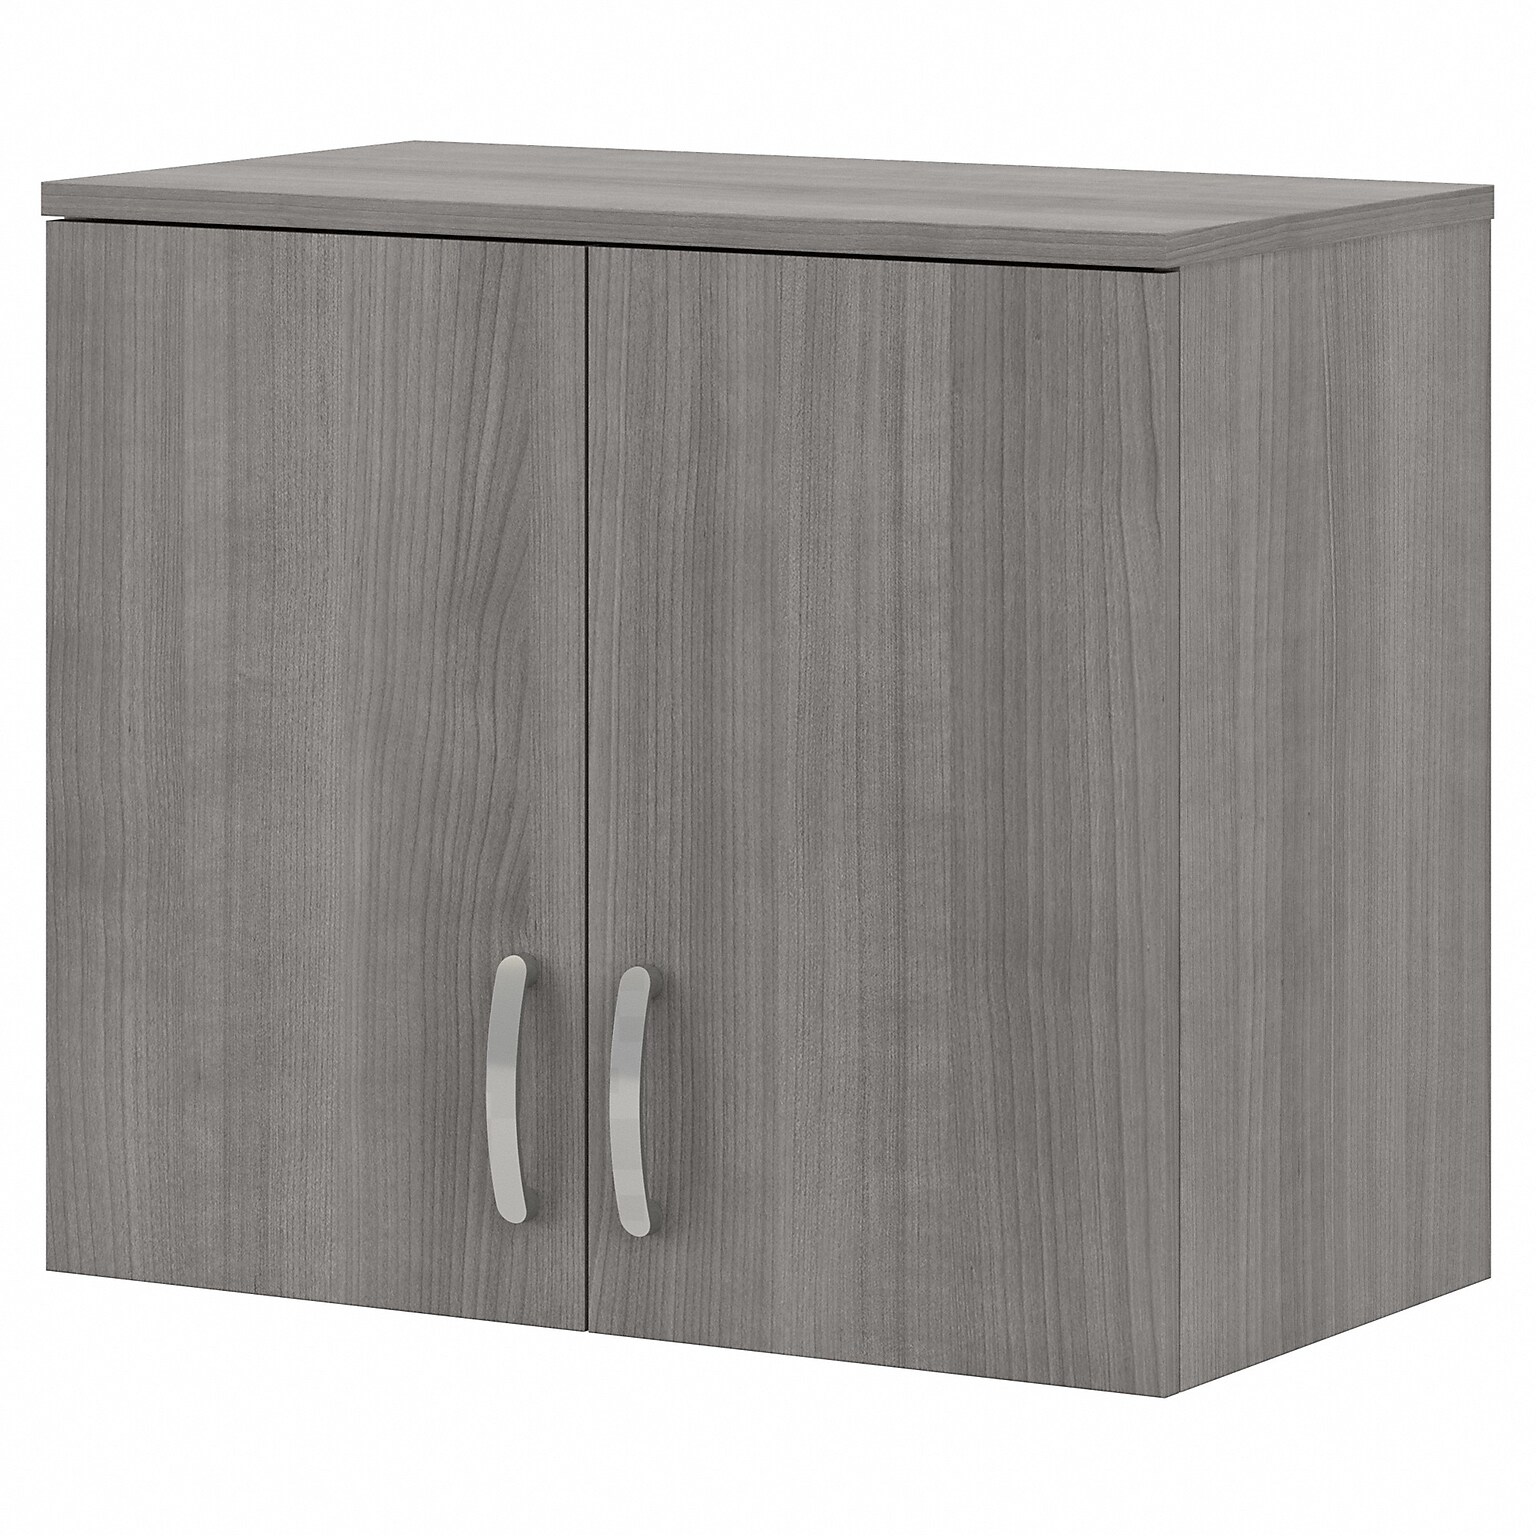 Bush Business Furniture Universal 24 Wall Cabinet with Doors and 2 Shelves, Platinum Gray (UNS428PG)